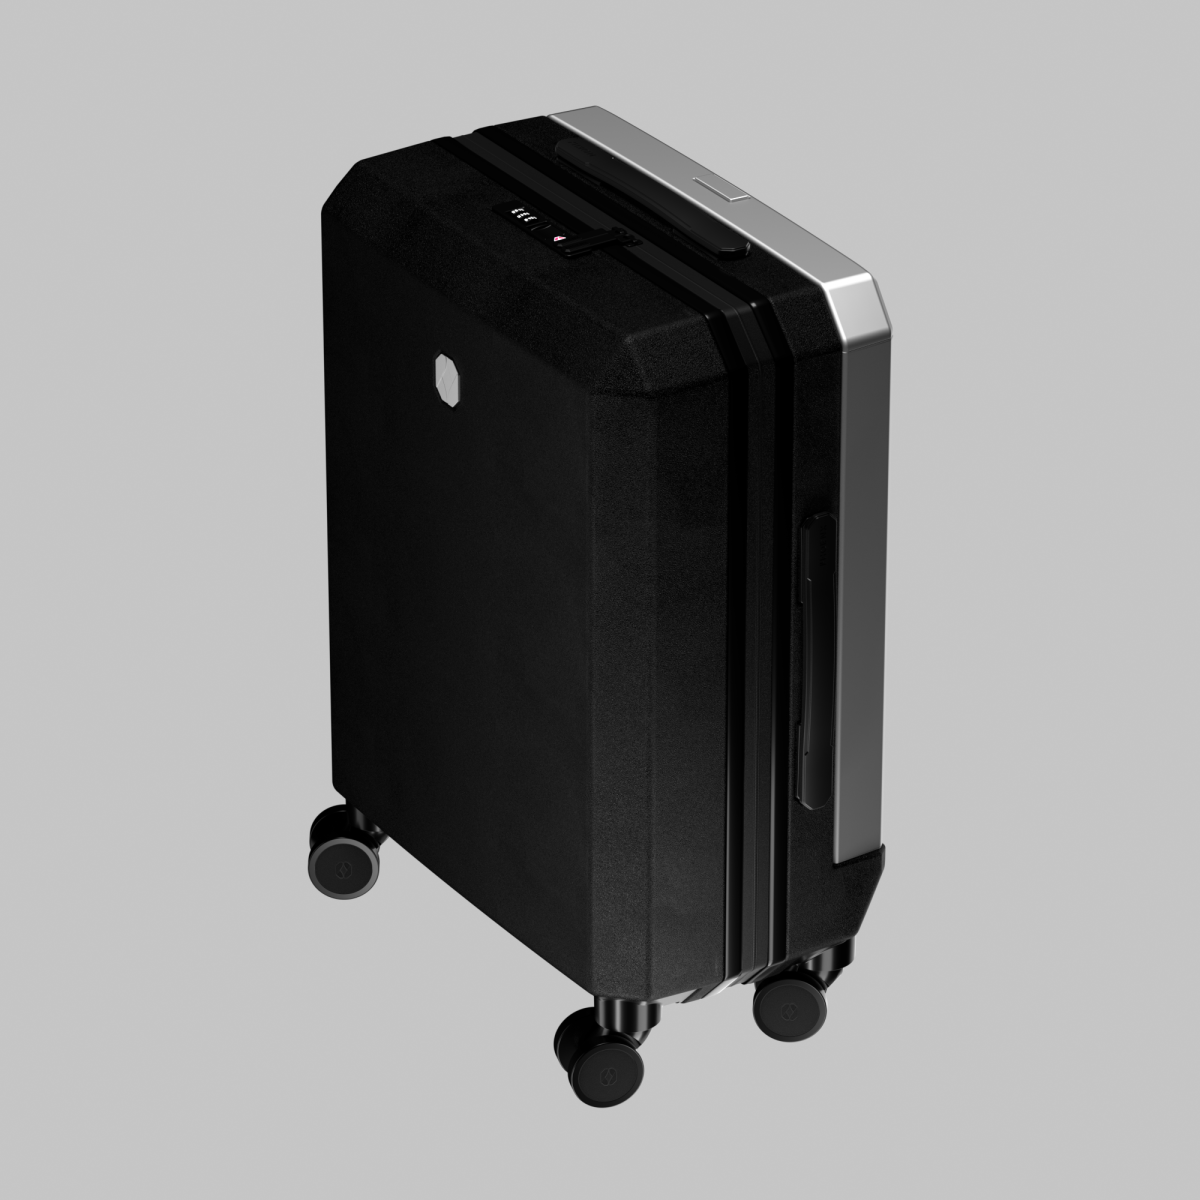 Phoenx Carry-On Suitcase, $210, available here.